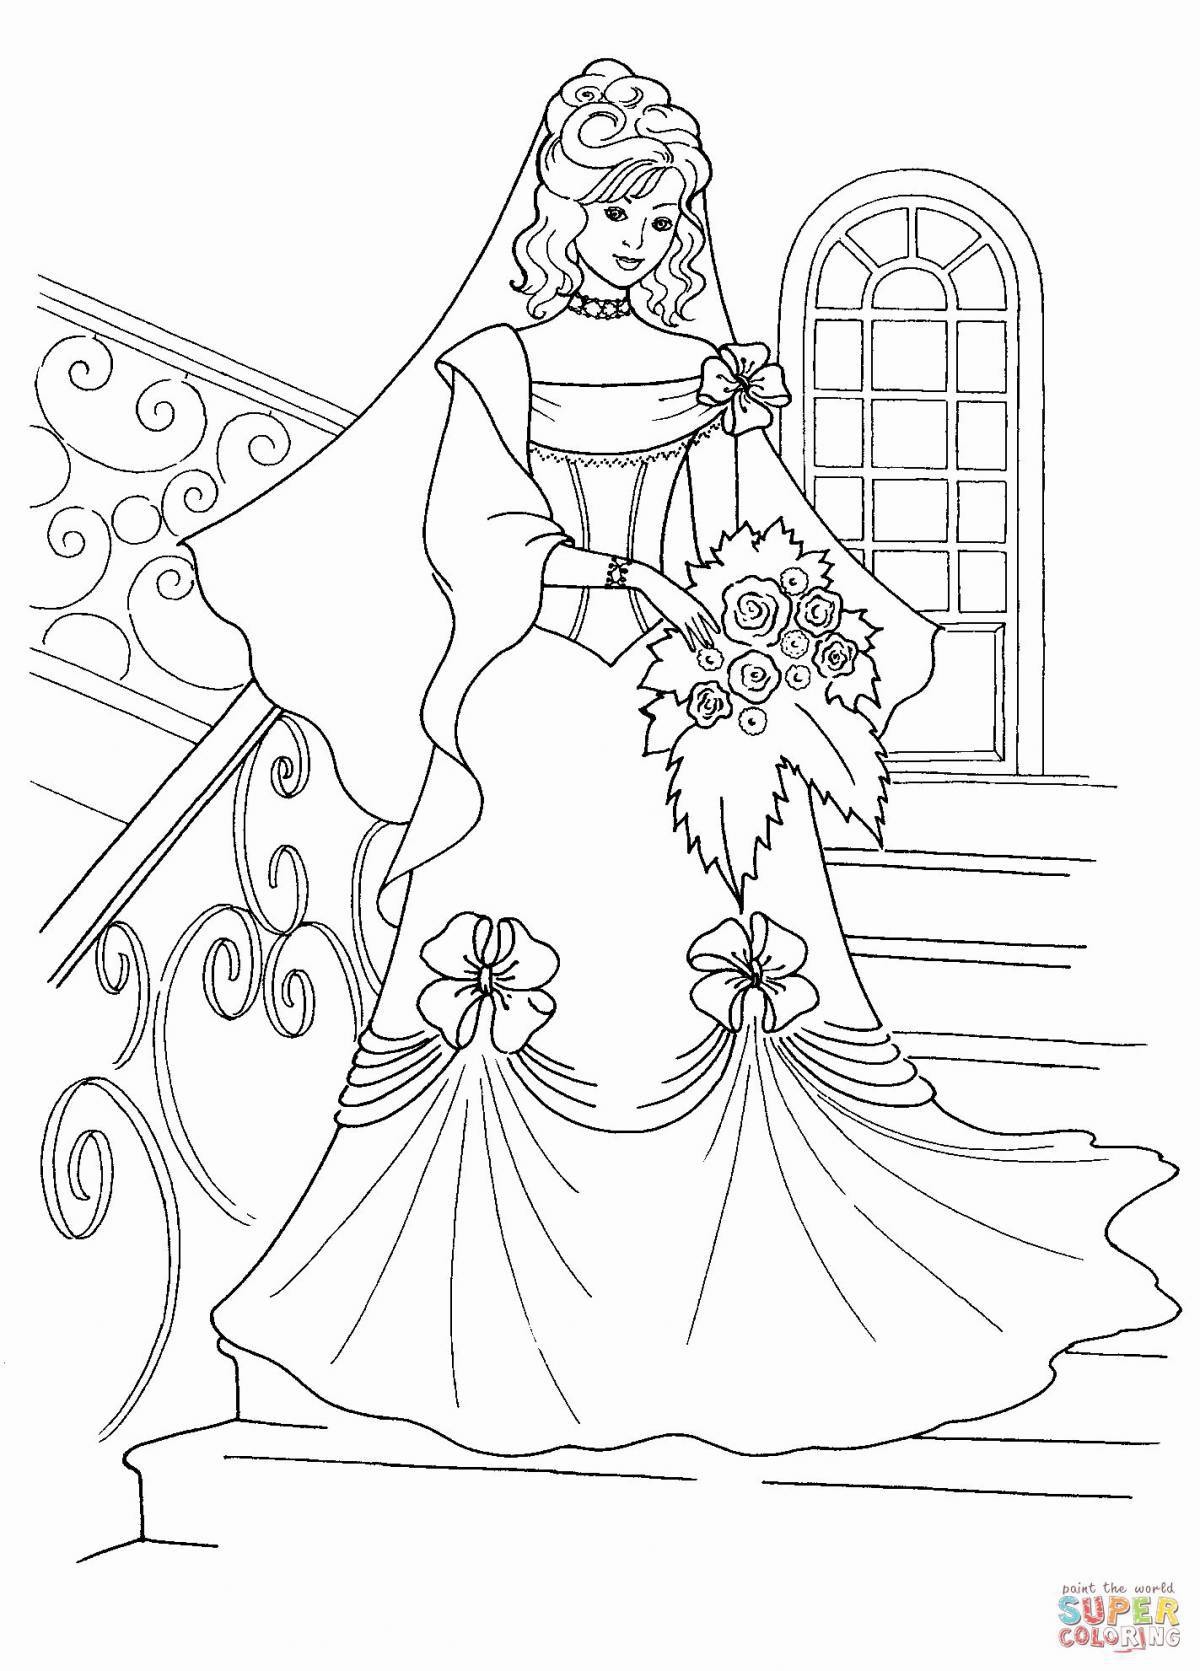 Glitter coloring of the princess in beautiful dresses